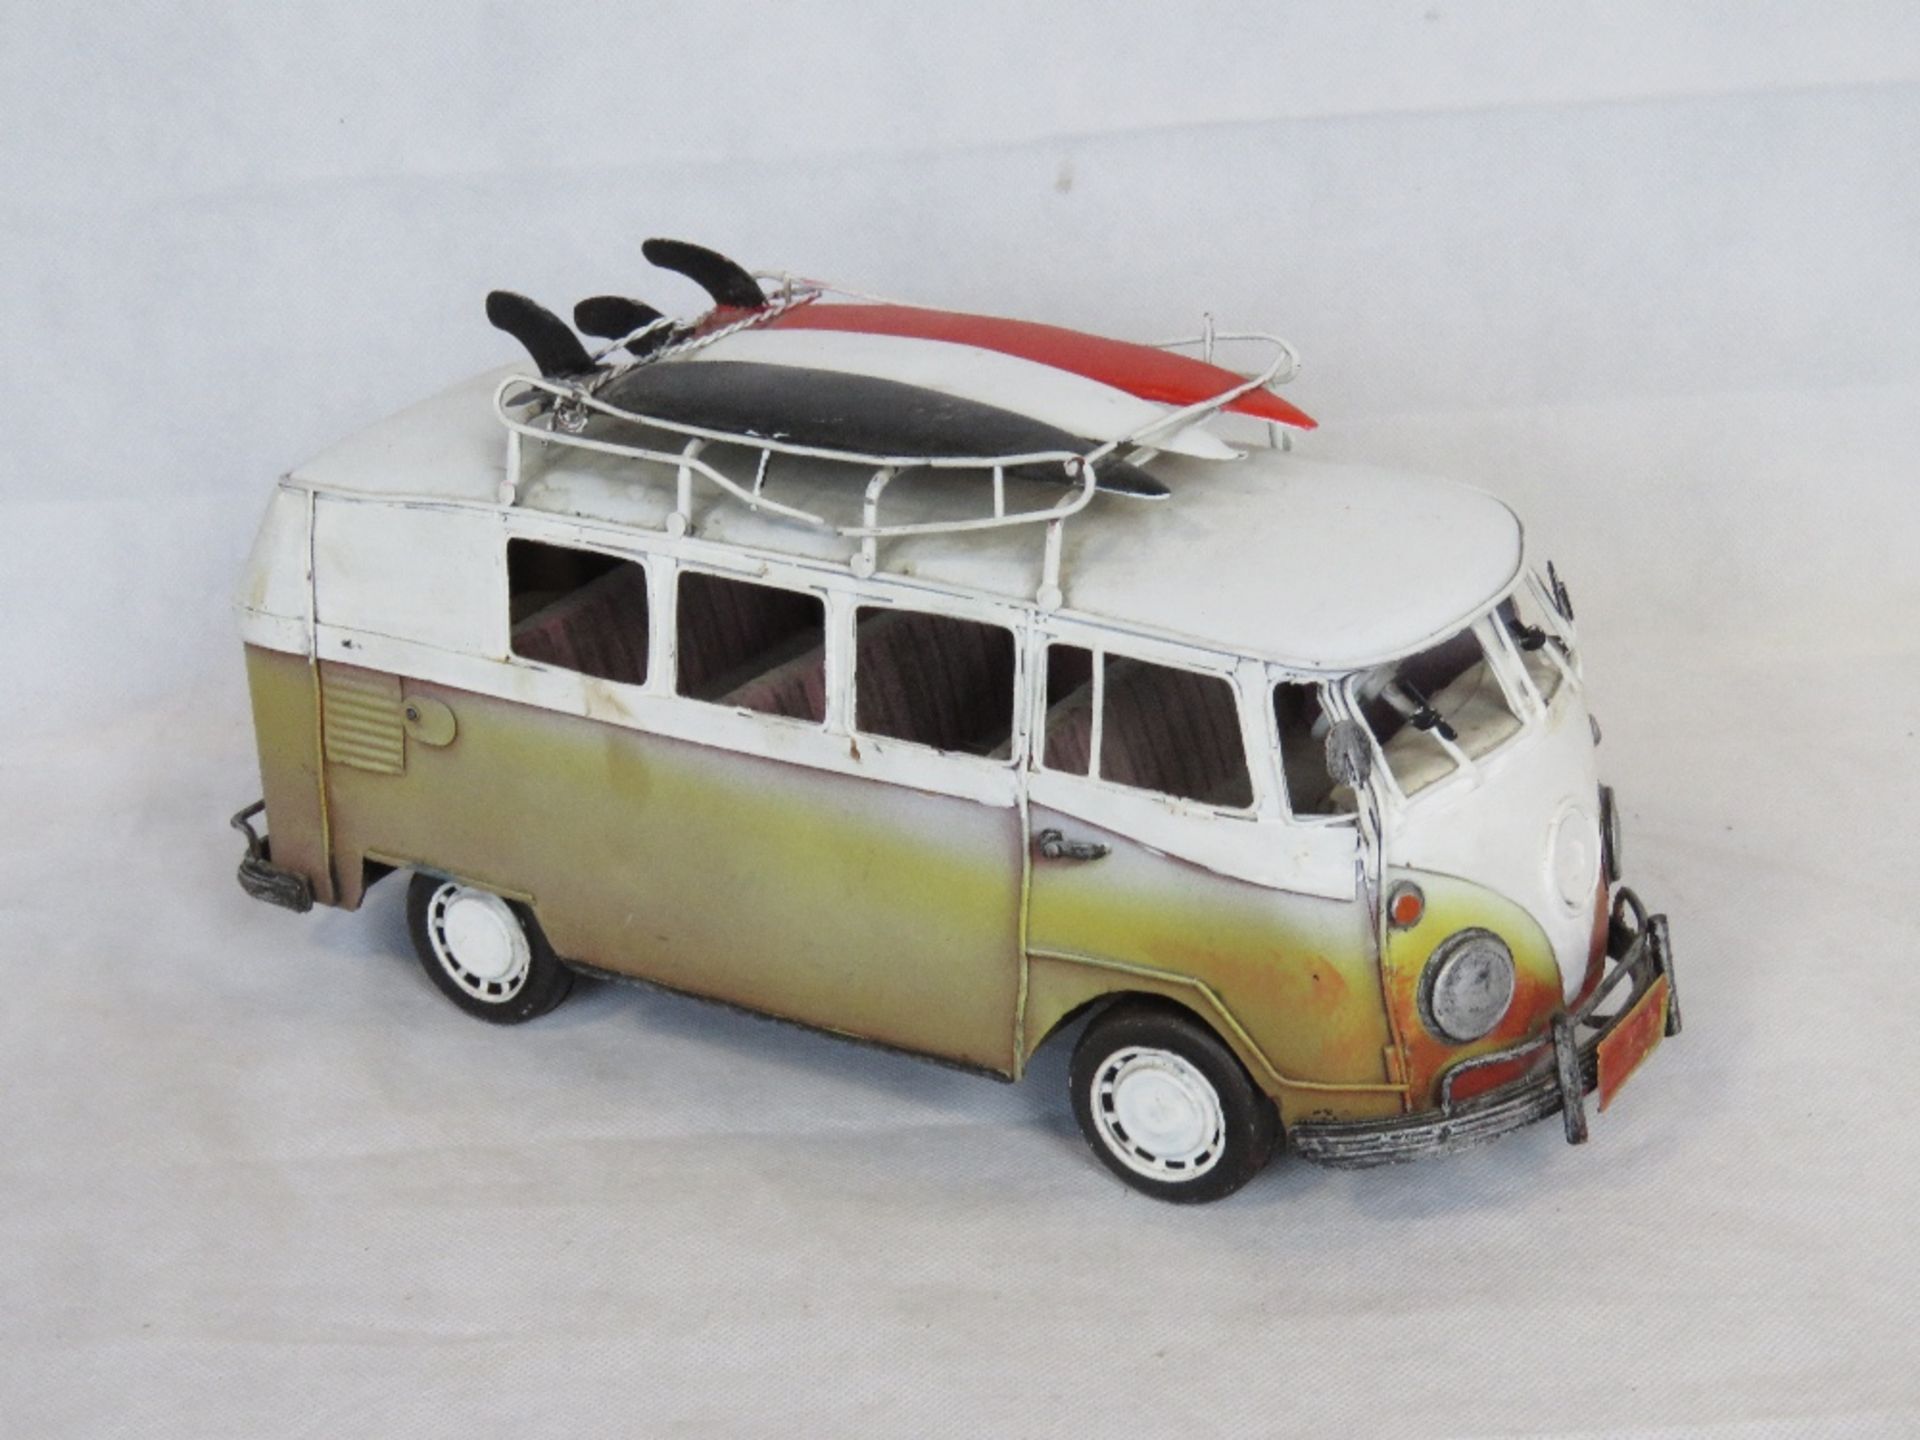 A contemporary large scale metal model of a VW Camper van.